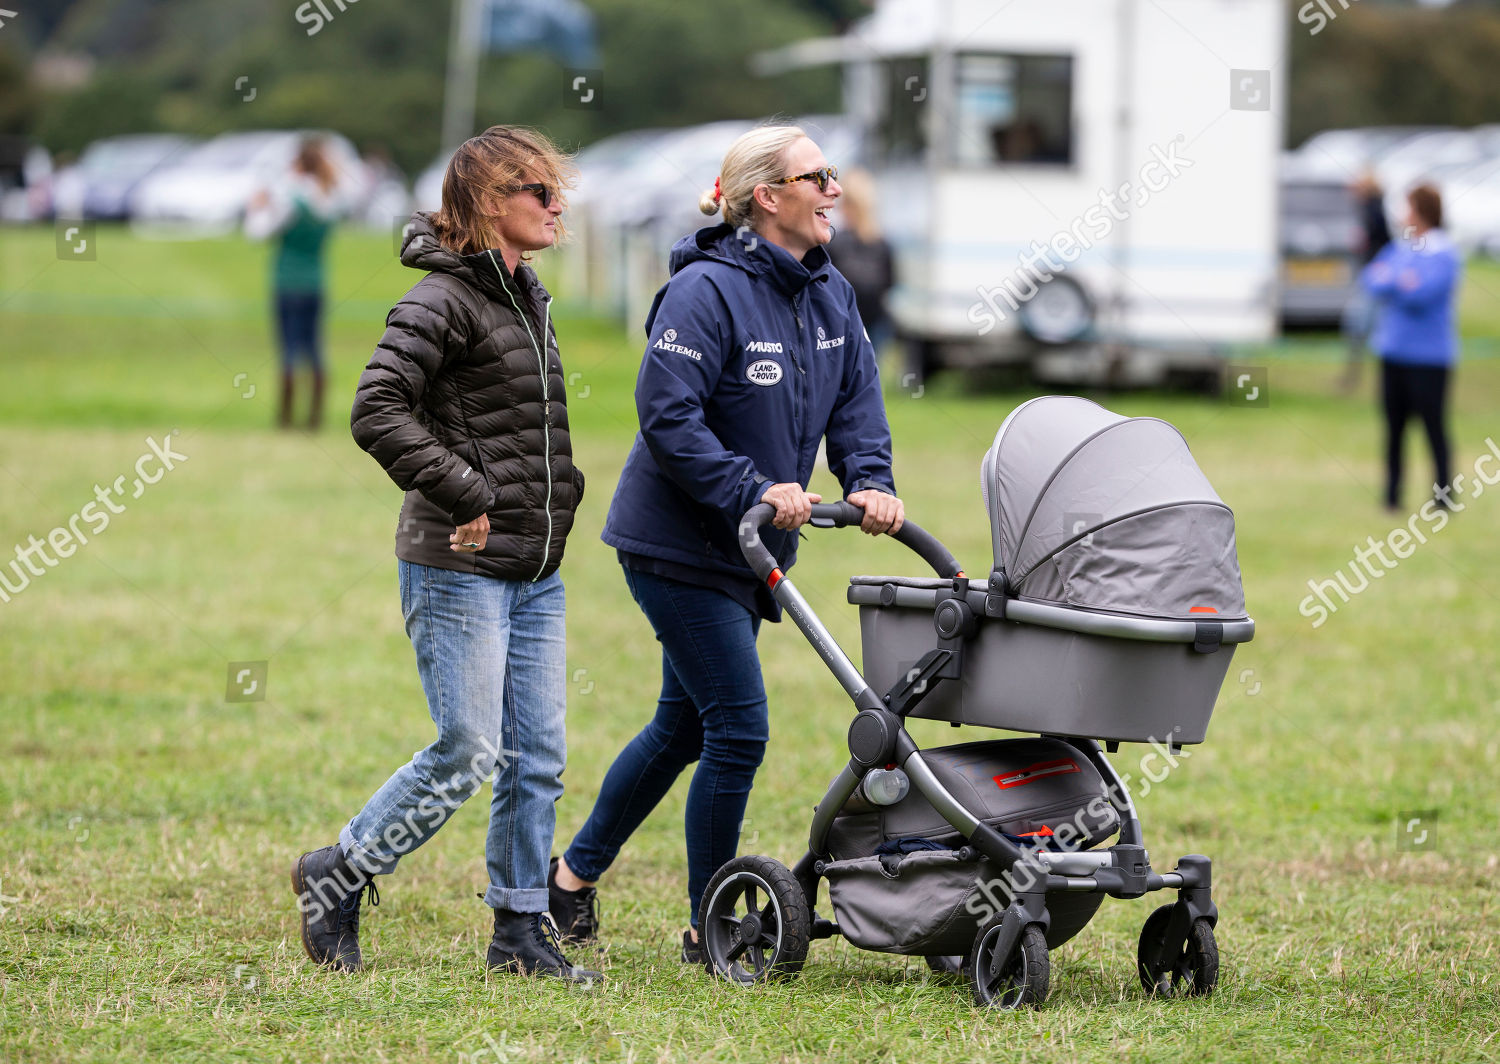 whately-manor-international-horse-trials-at-gatcombe-park-gloucestershire-uk-shutterstock-editorial-9877099h.jpg